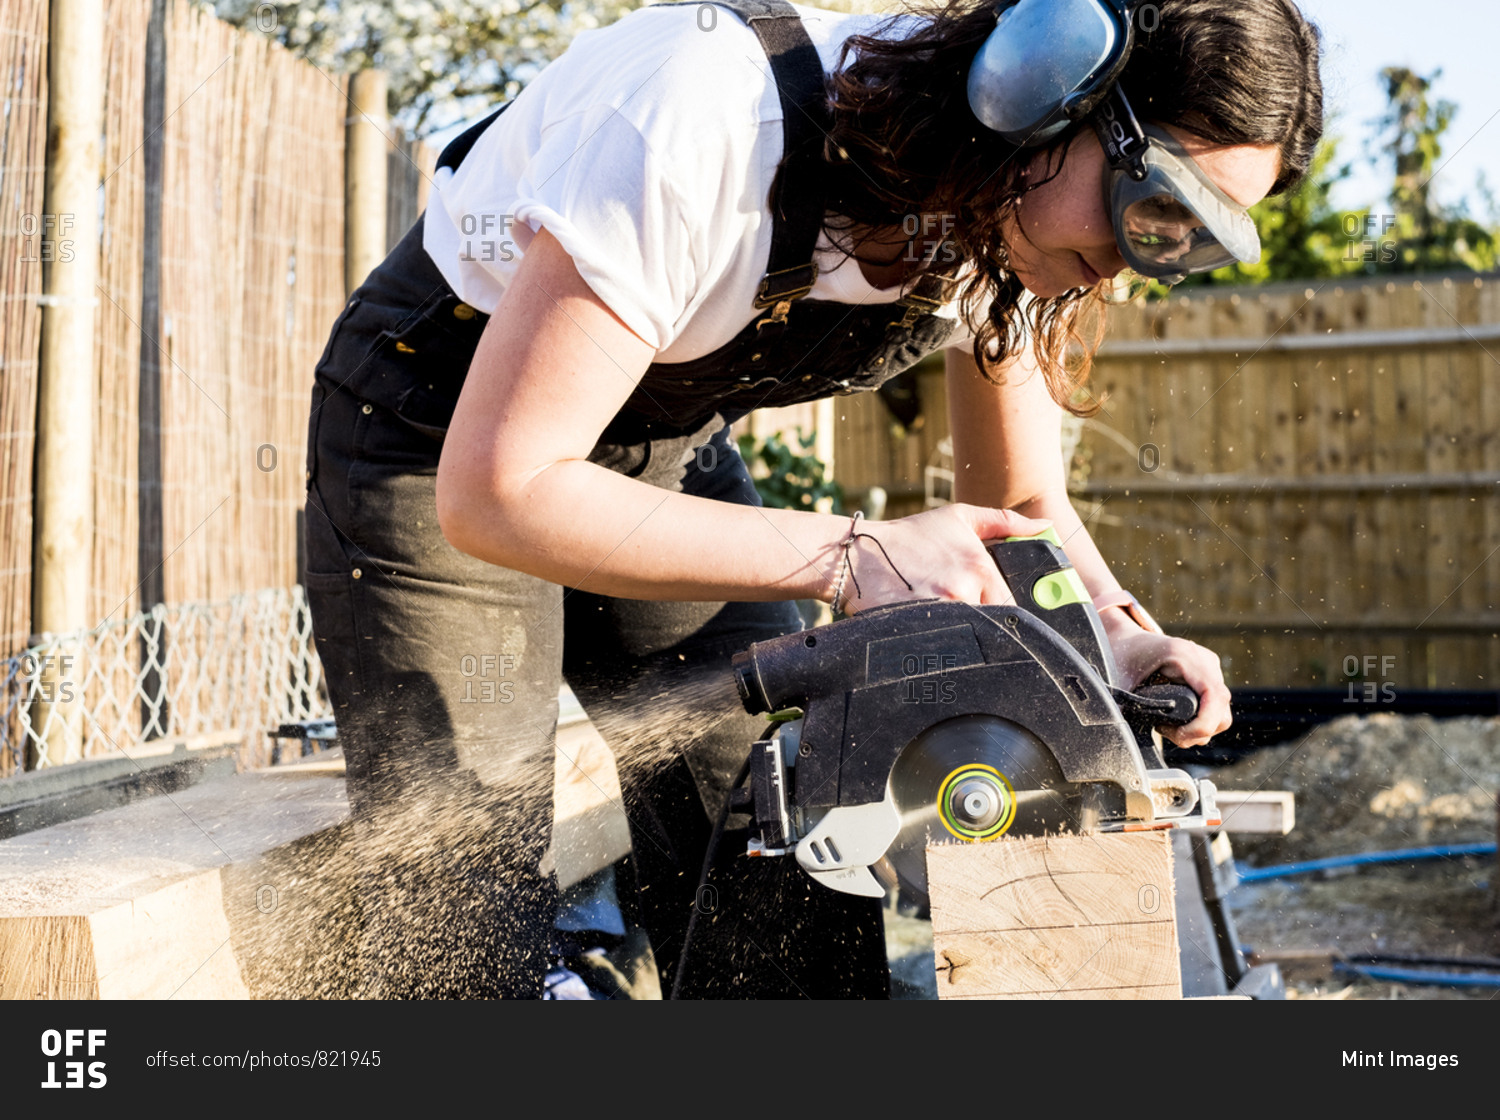 Woman wearing protective goggles and ear protectors holding circular saw, cutting piece of wood on building side.